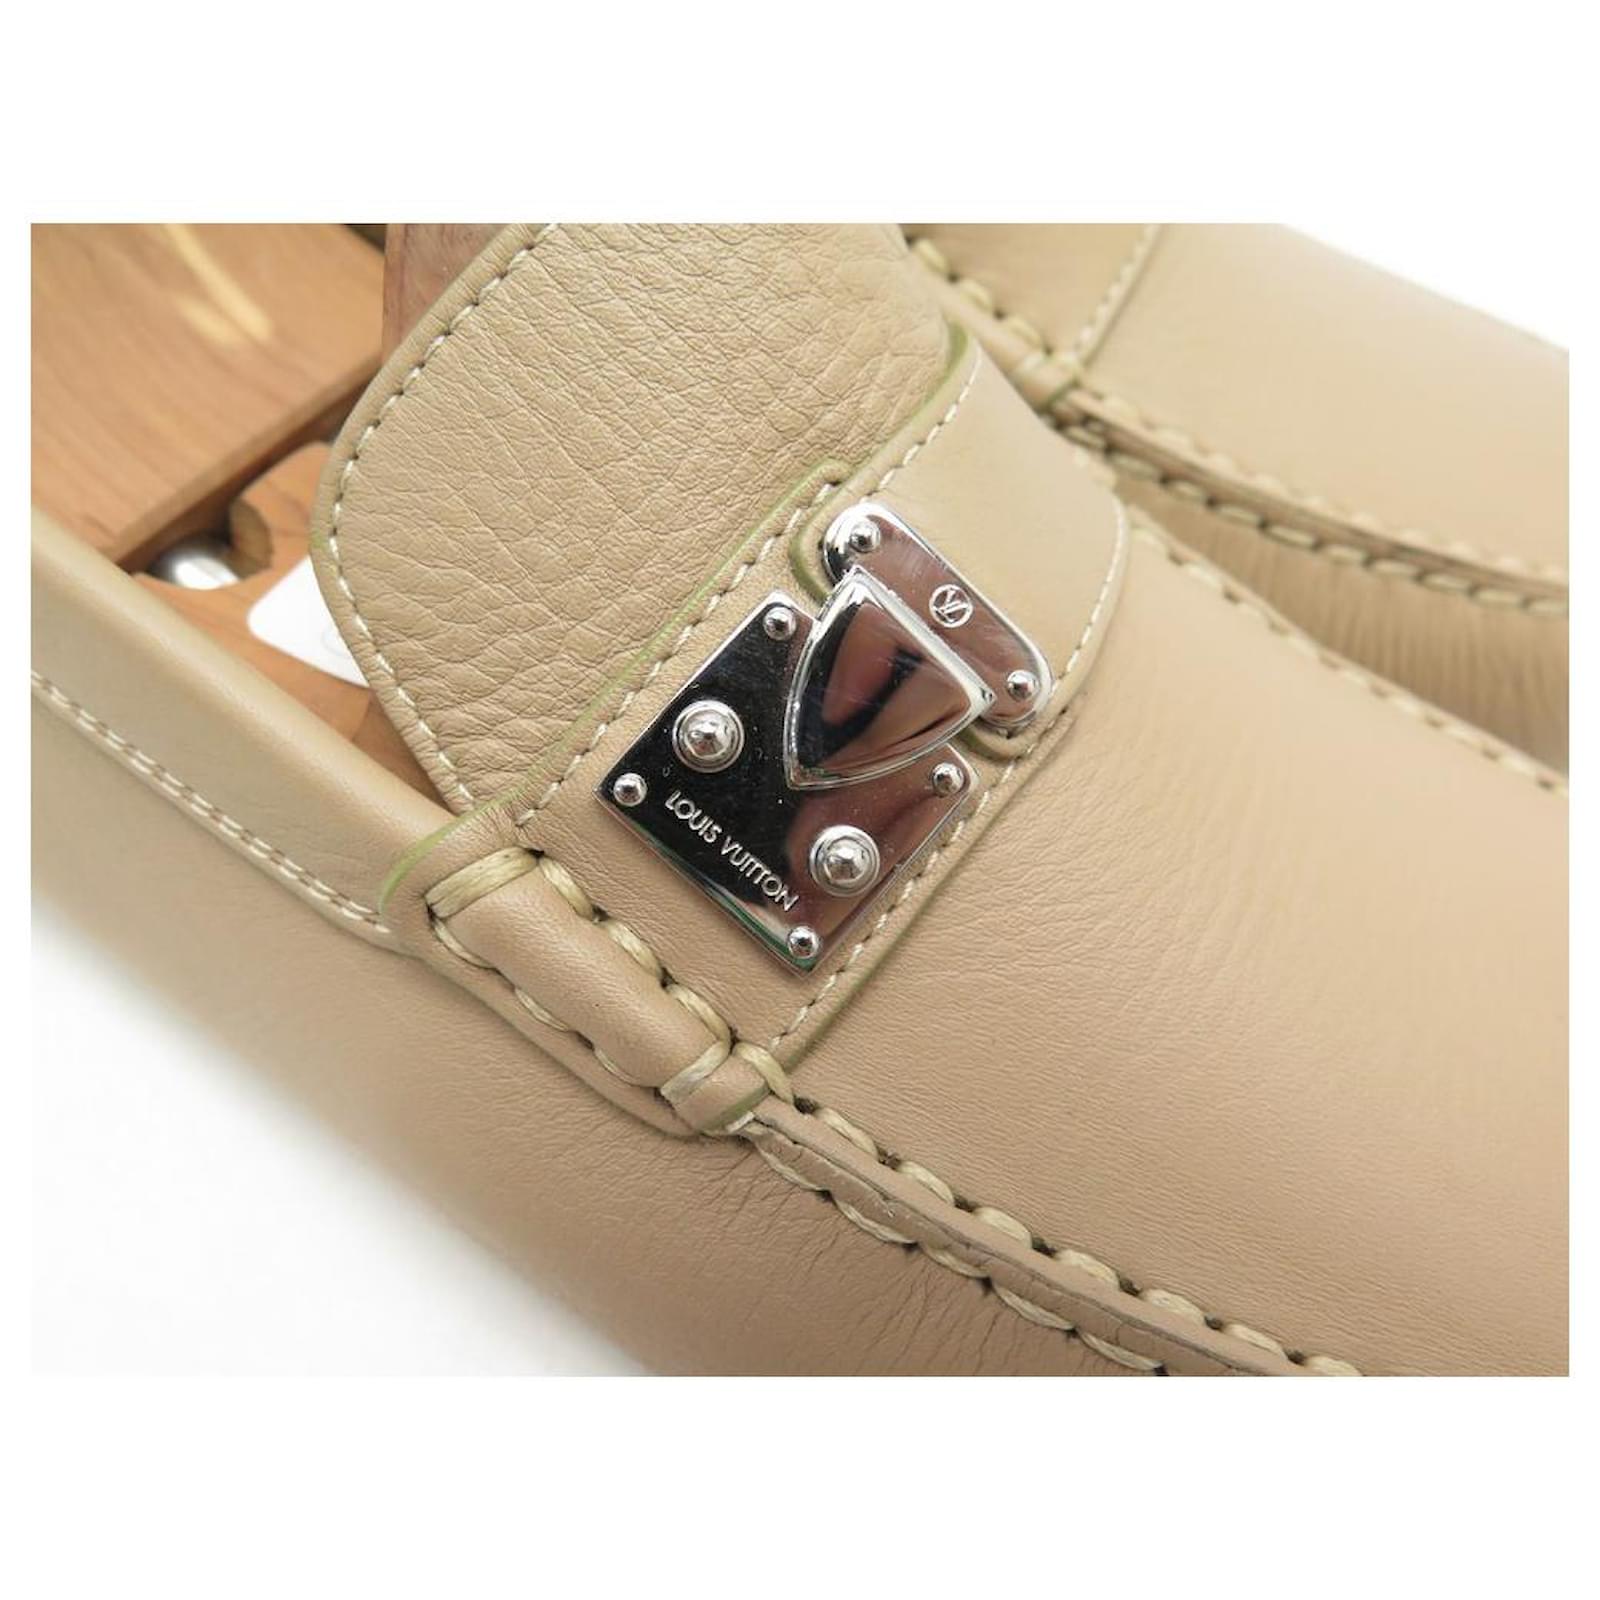 NEW LOUIS VUITTON SHOES LOMBOK MOCCASIN 8.5 42.5 BEIGE LEATHER BOX